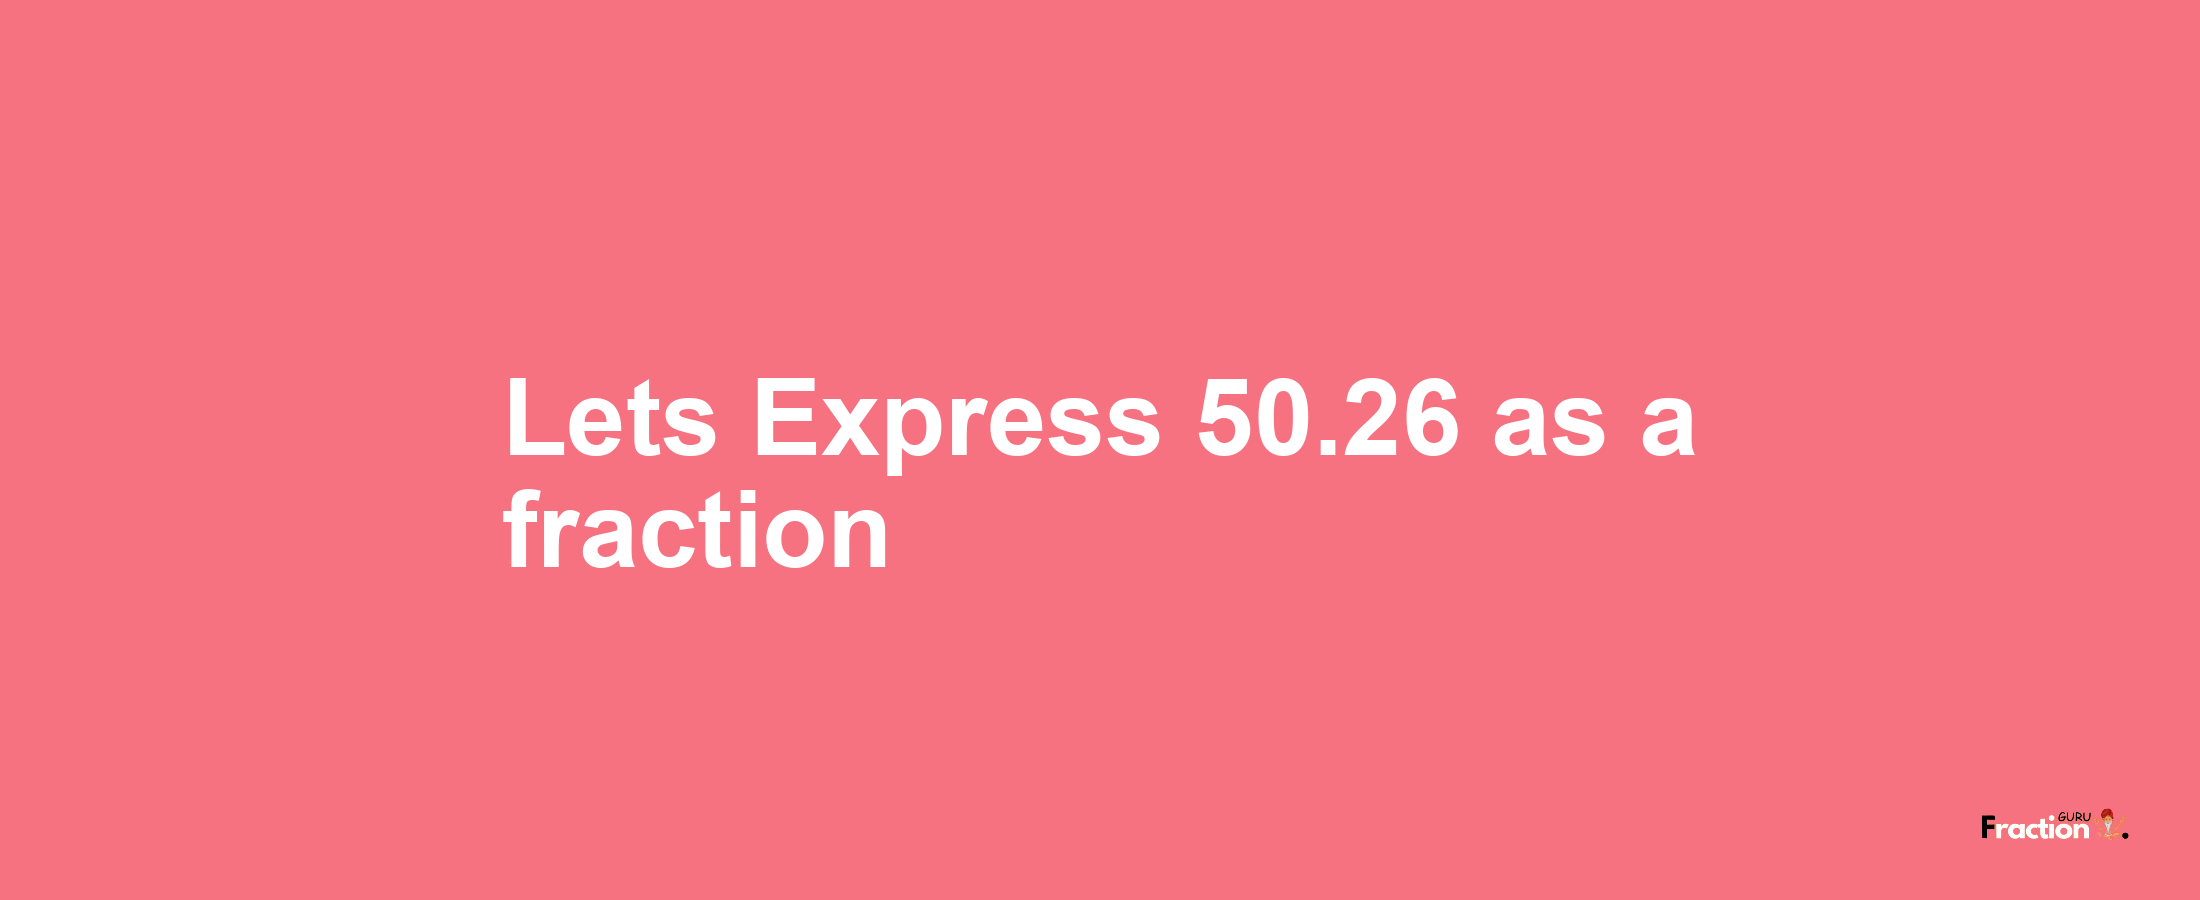 Lets Express 50.26 as afraction